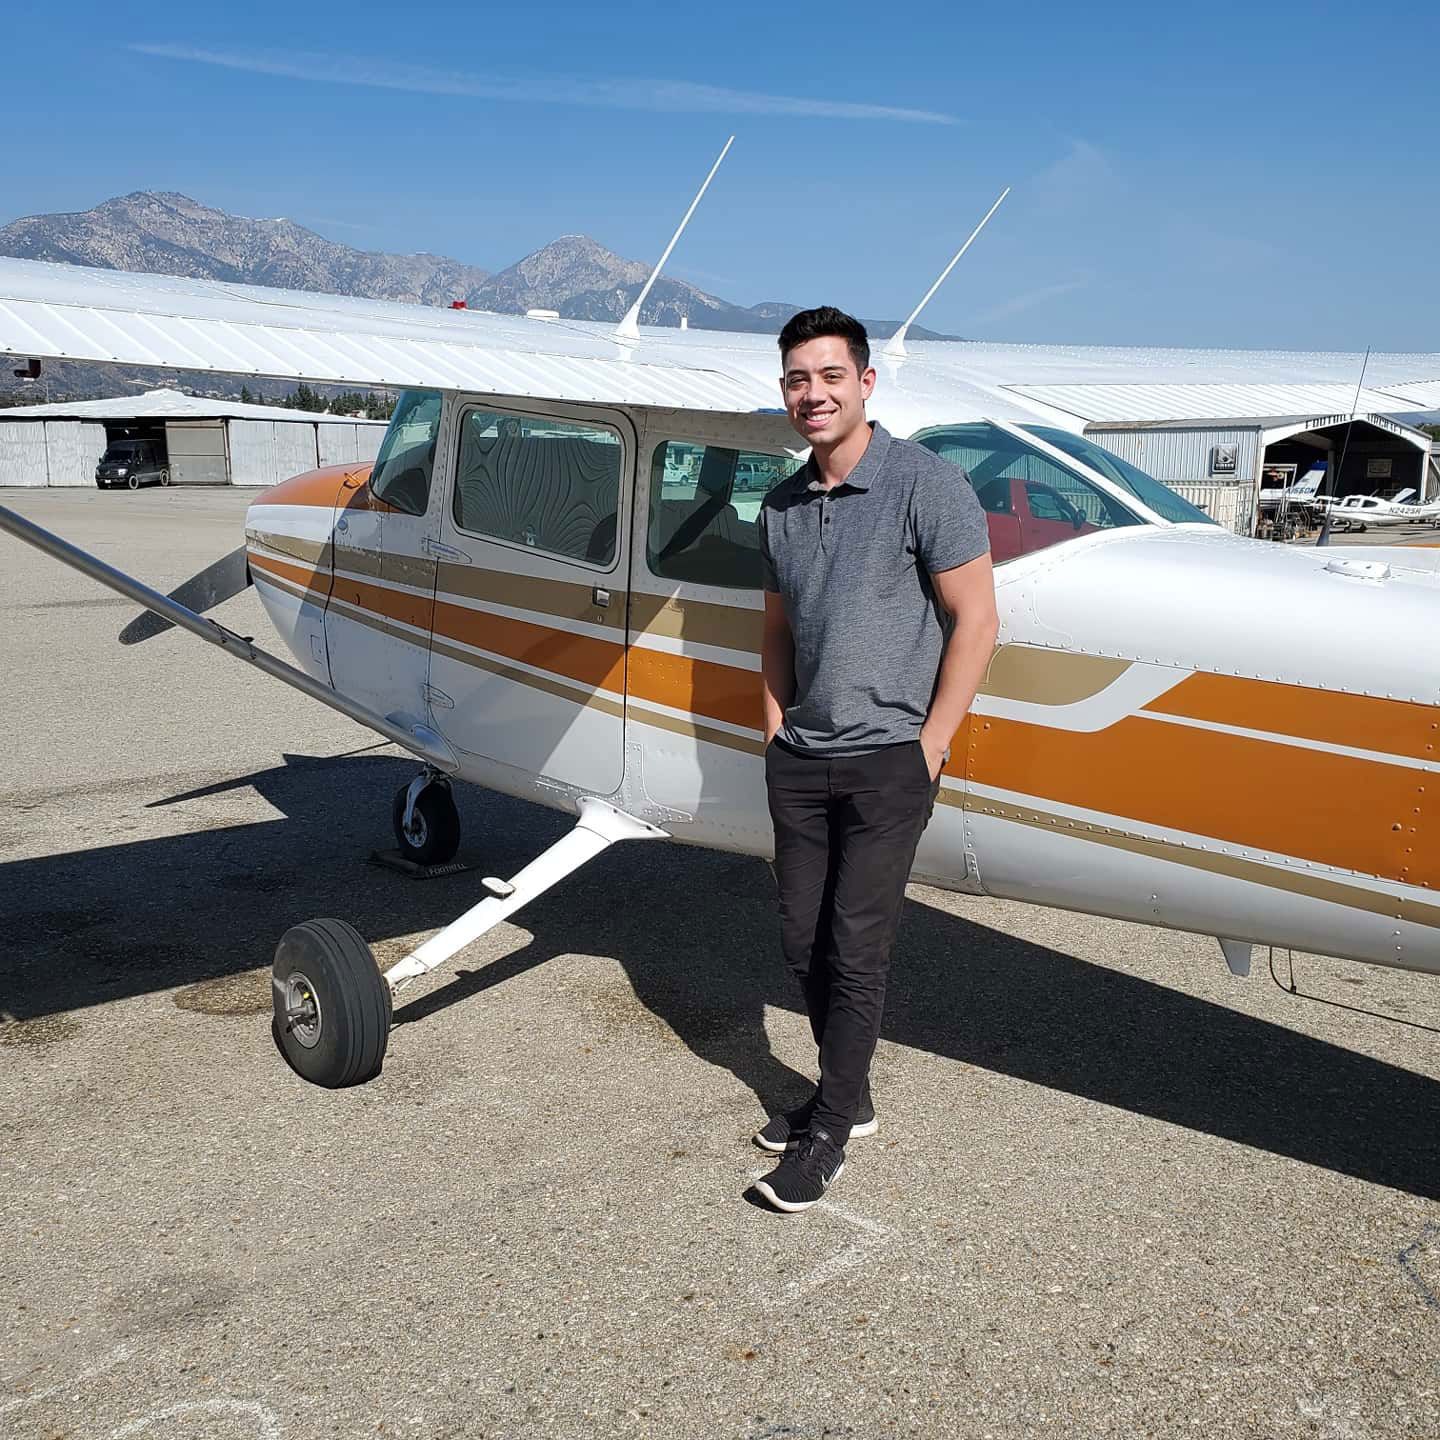 Robert with a plane